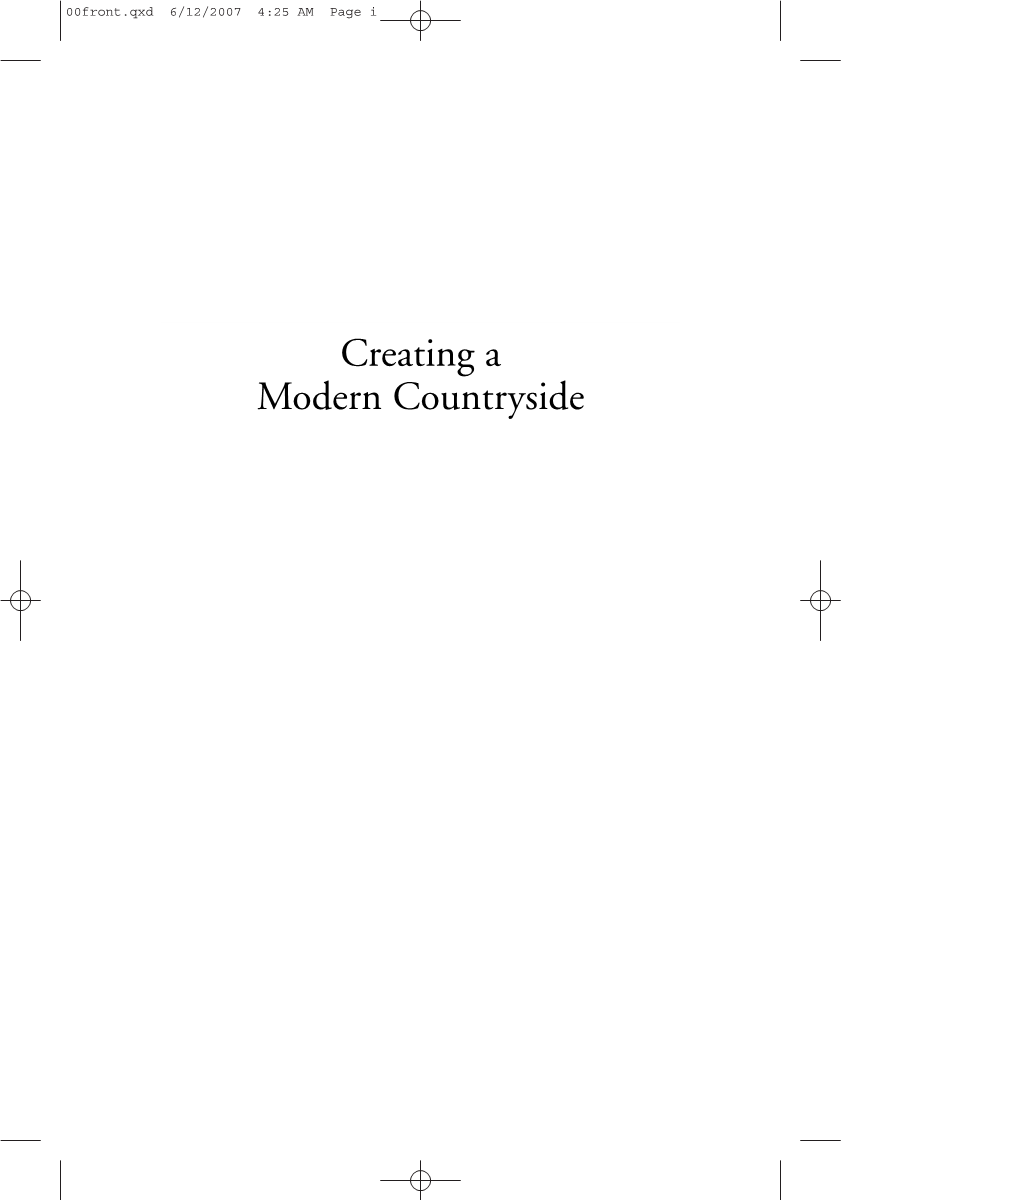 Creating a Modern Countryside 00Front.Qxd 6/12/2007 4:25 AM Page Ii